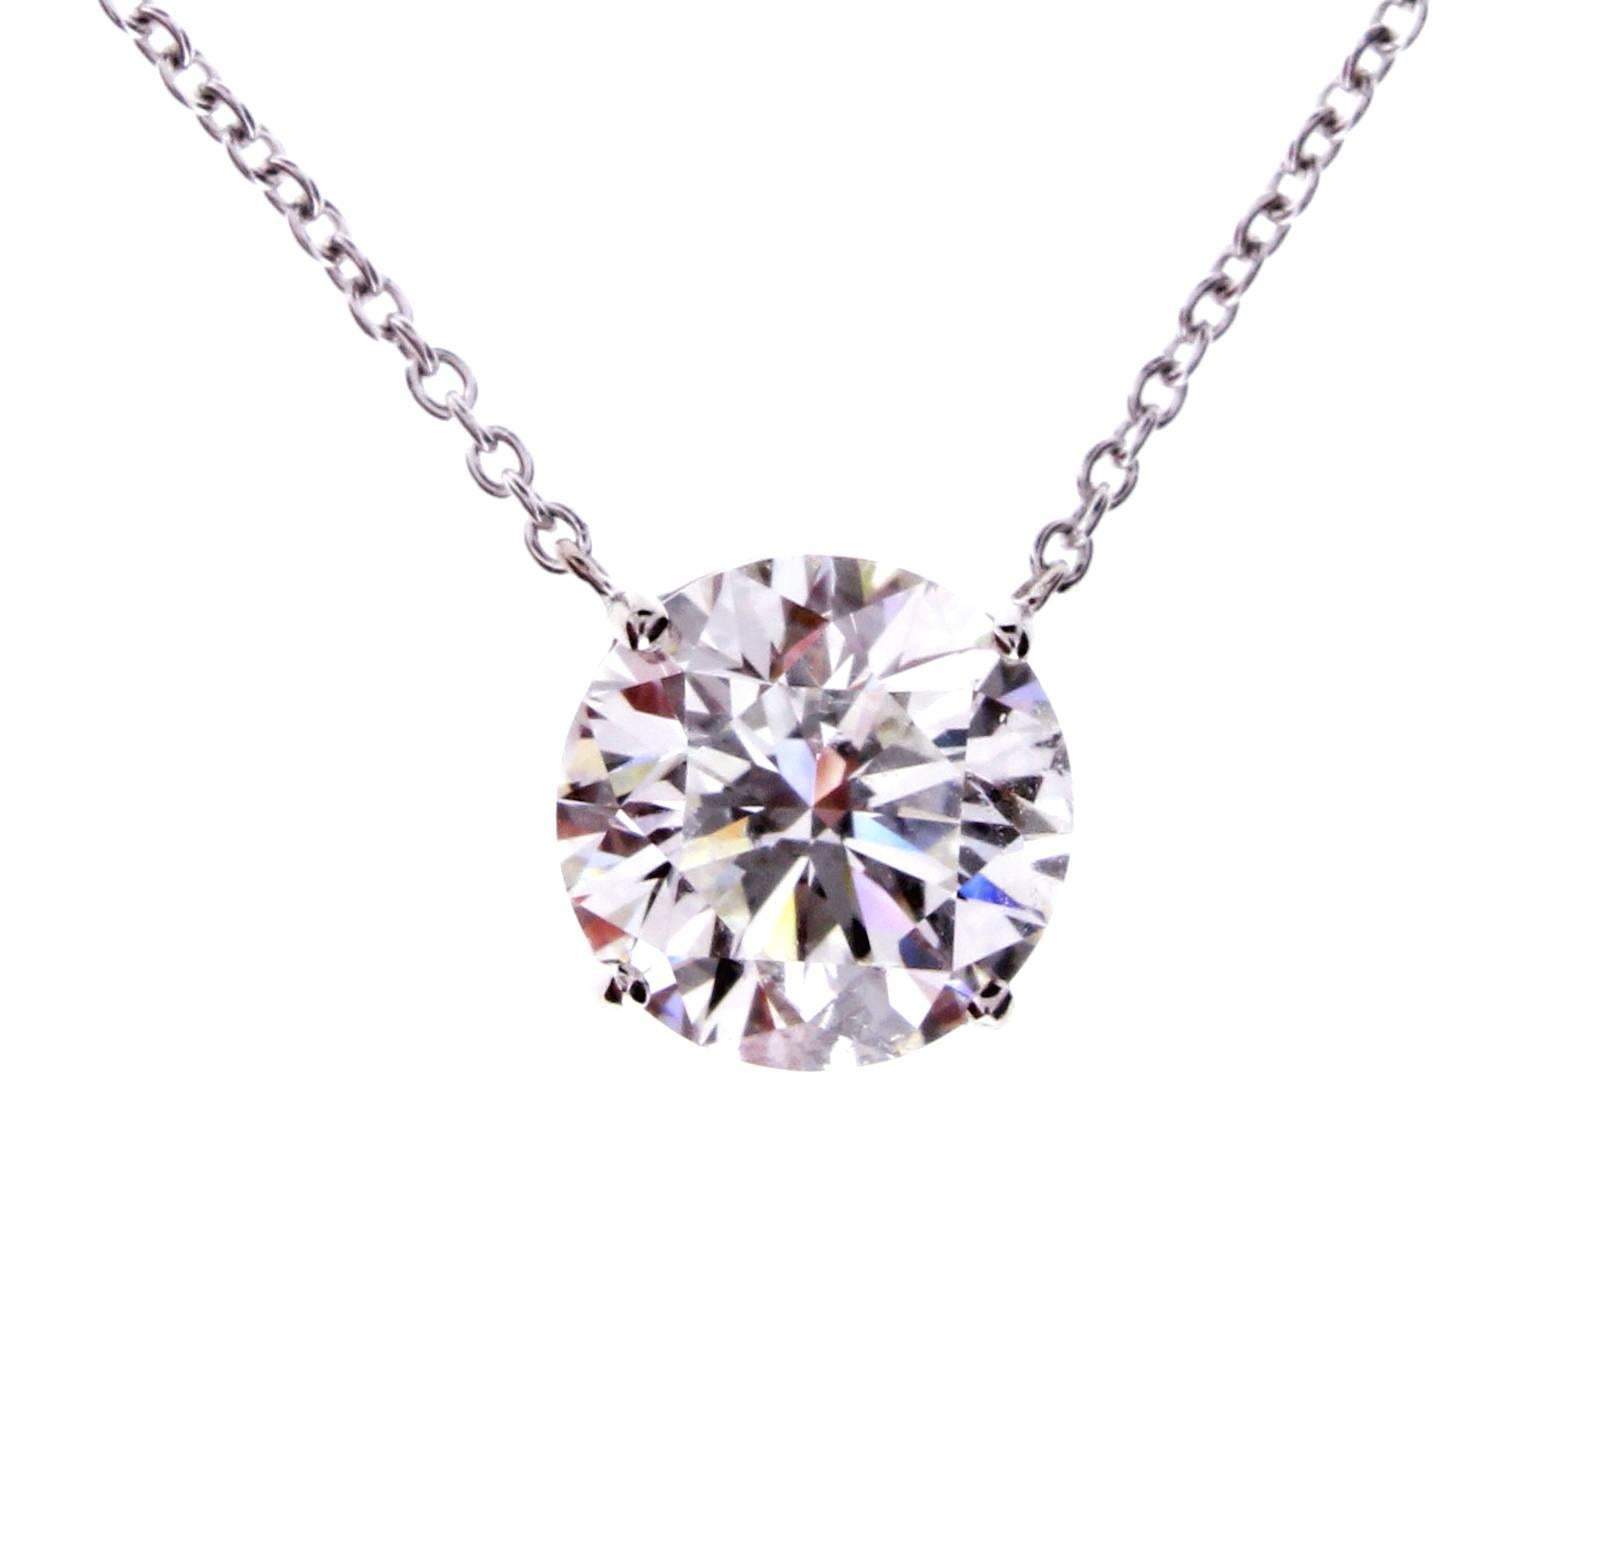 Classic designs and extraordinary diamonds are hallmarks the world renowned    jeweler; Graff. This necklace features a 2.30 carat H, VS1 extraordinarily cut brilliant Graff diamond. Set in platinum. 16 inch adjustable chain